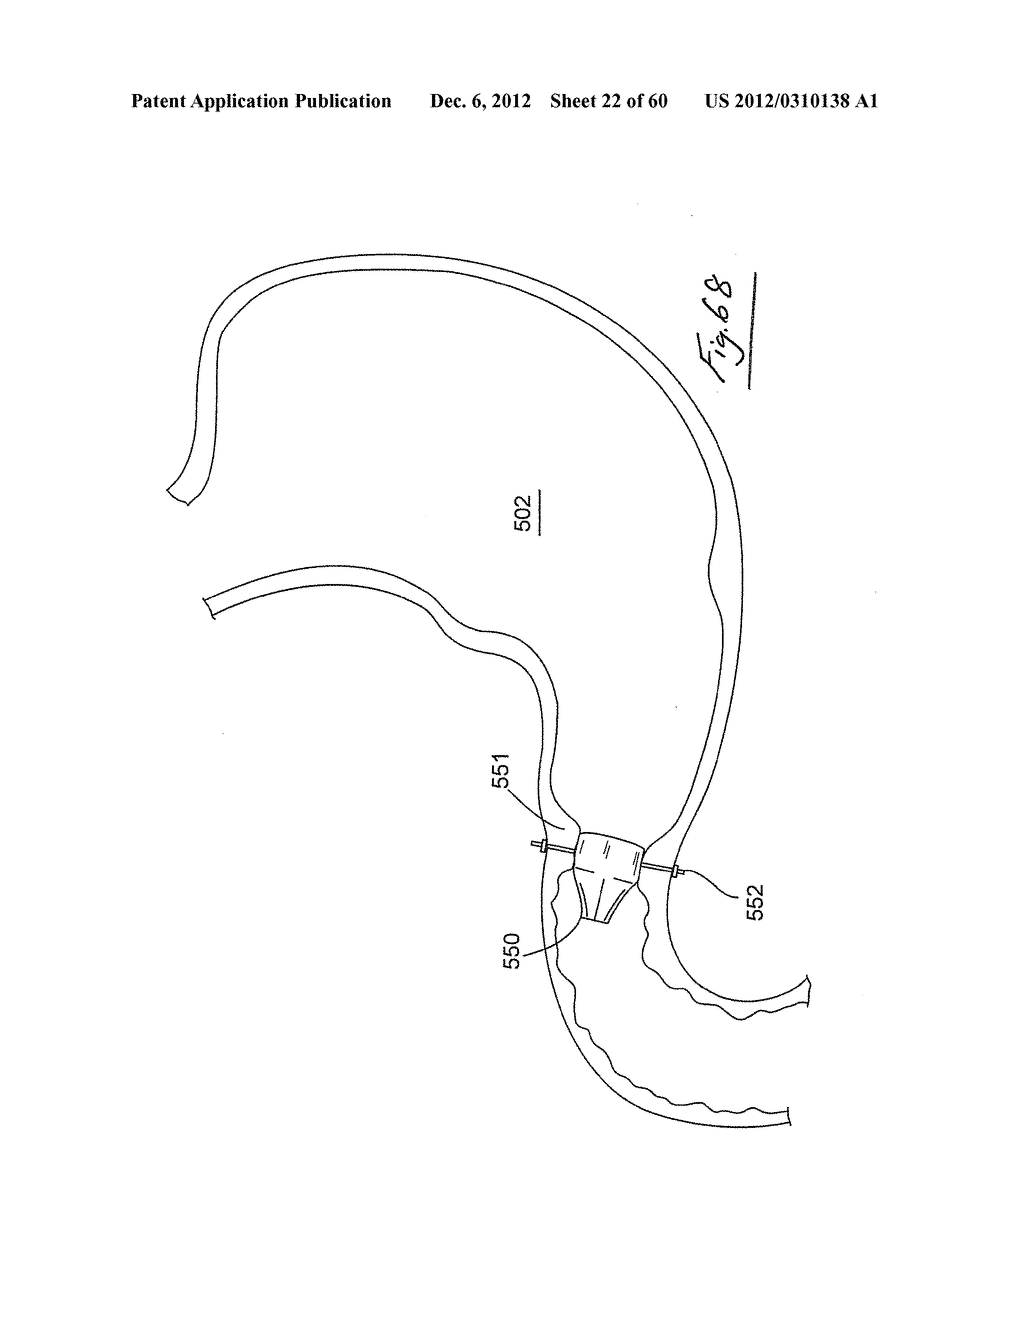 GASTROINTESTINAL IMPLANT DEVICE AND DELIVERY SYSTEM THEREFOR - diagram, schematic, and image 23